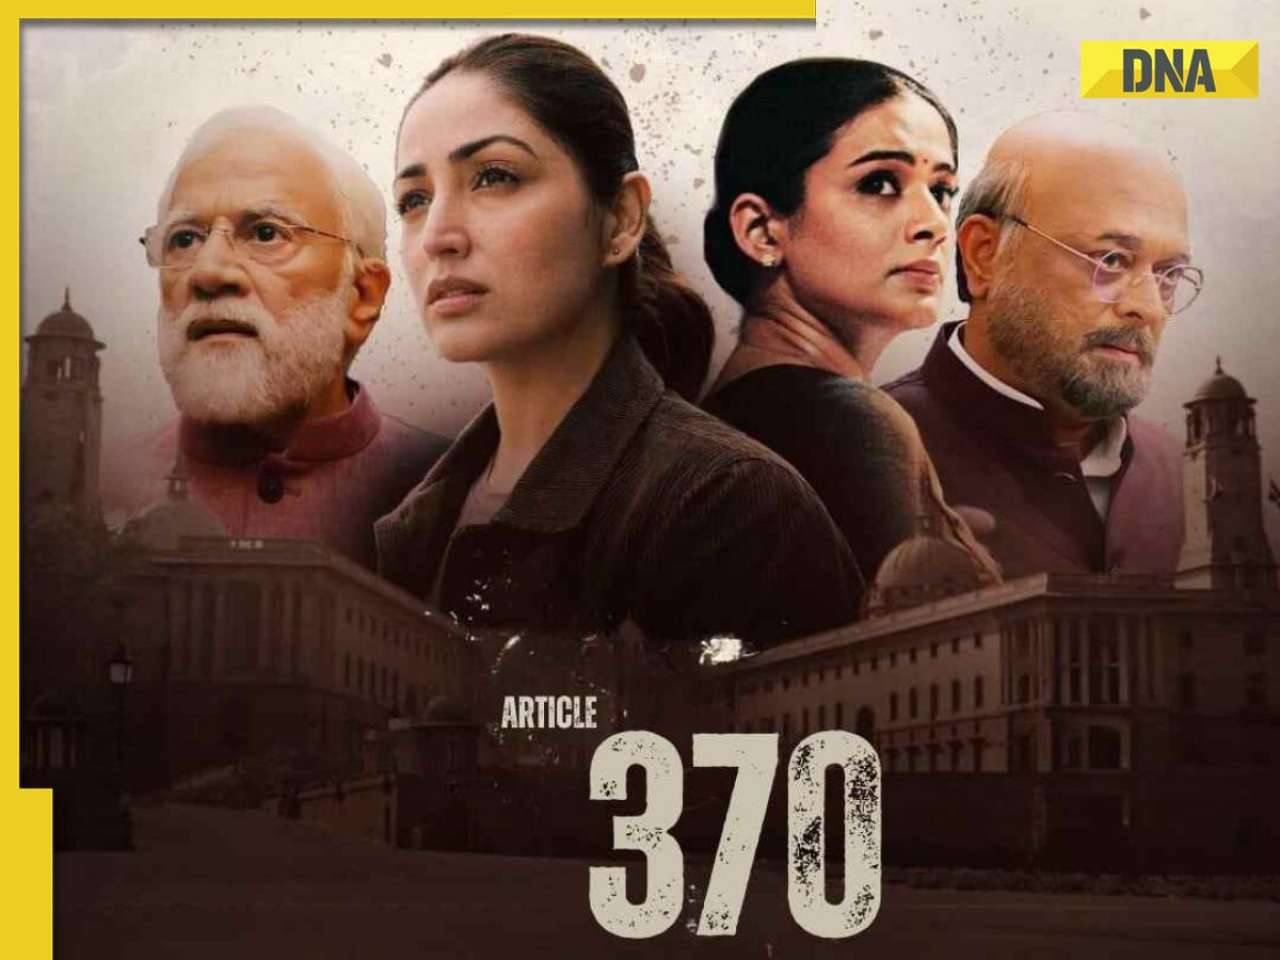 Article 370 OTT release: Here's when and where you can enjoy Yami Gautam's political thriller